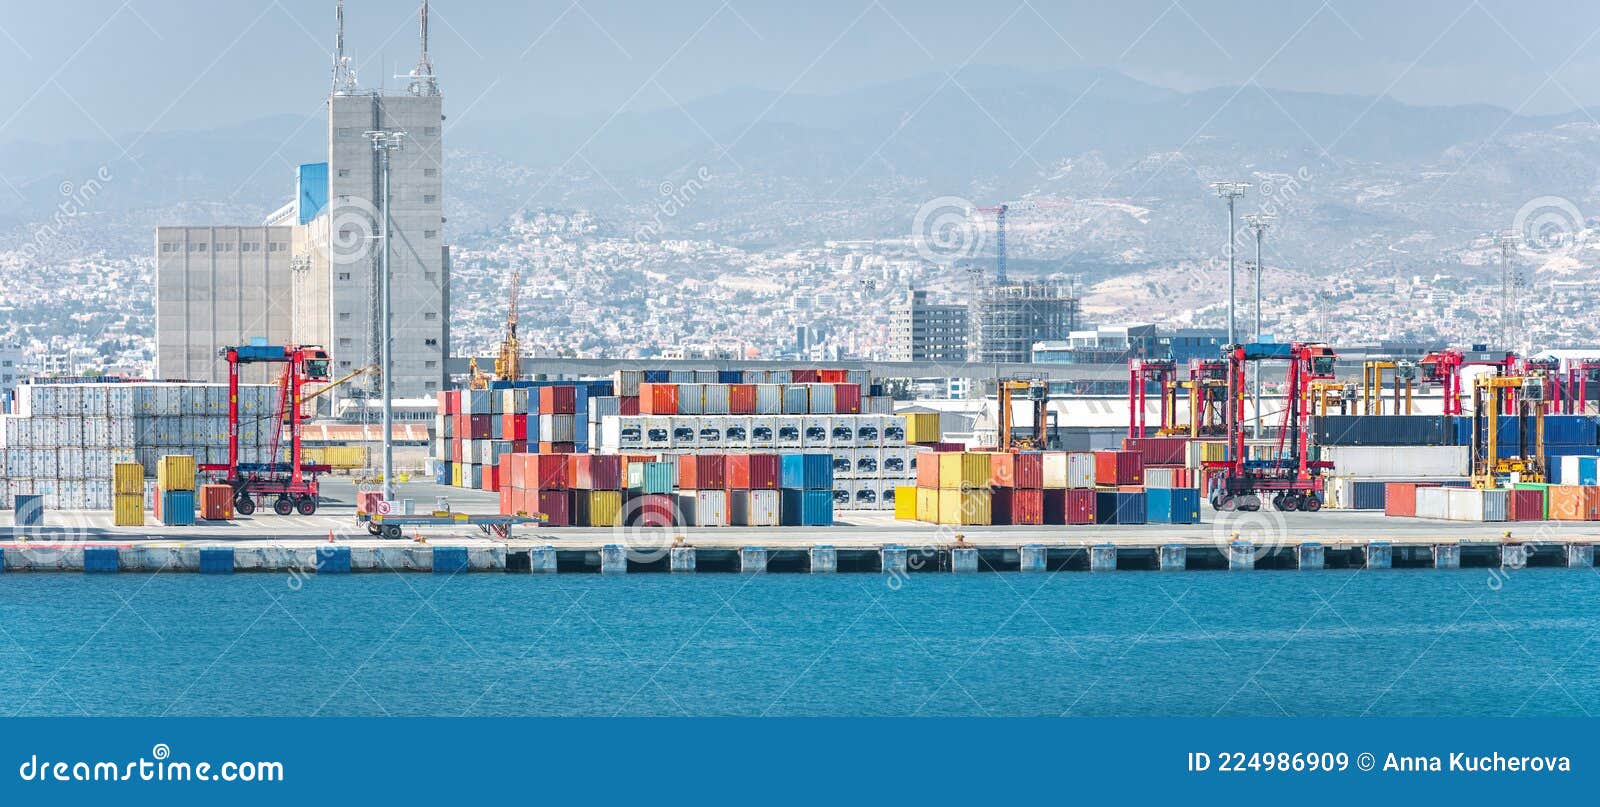 container yard with straddle carriers and other facilities in cargo terminal of limassol port